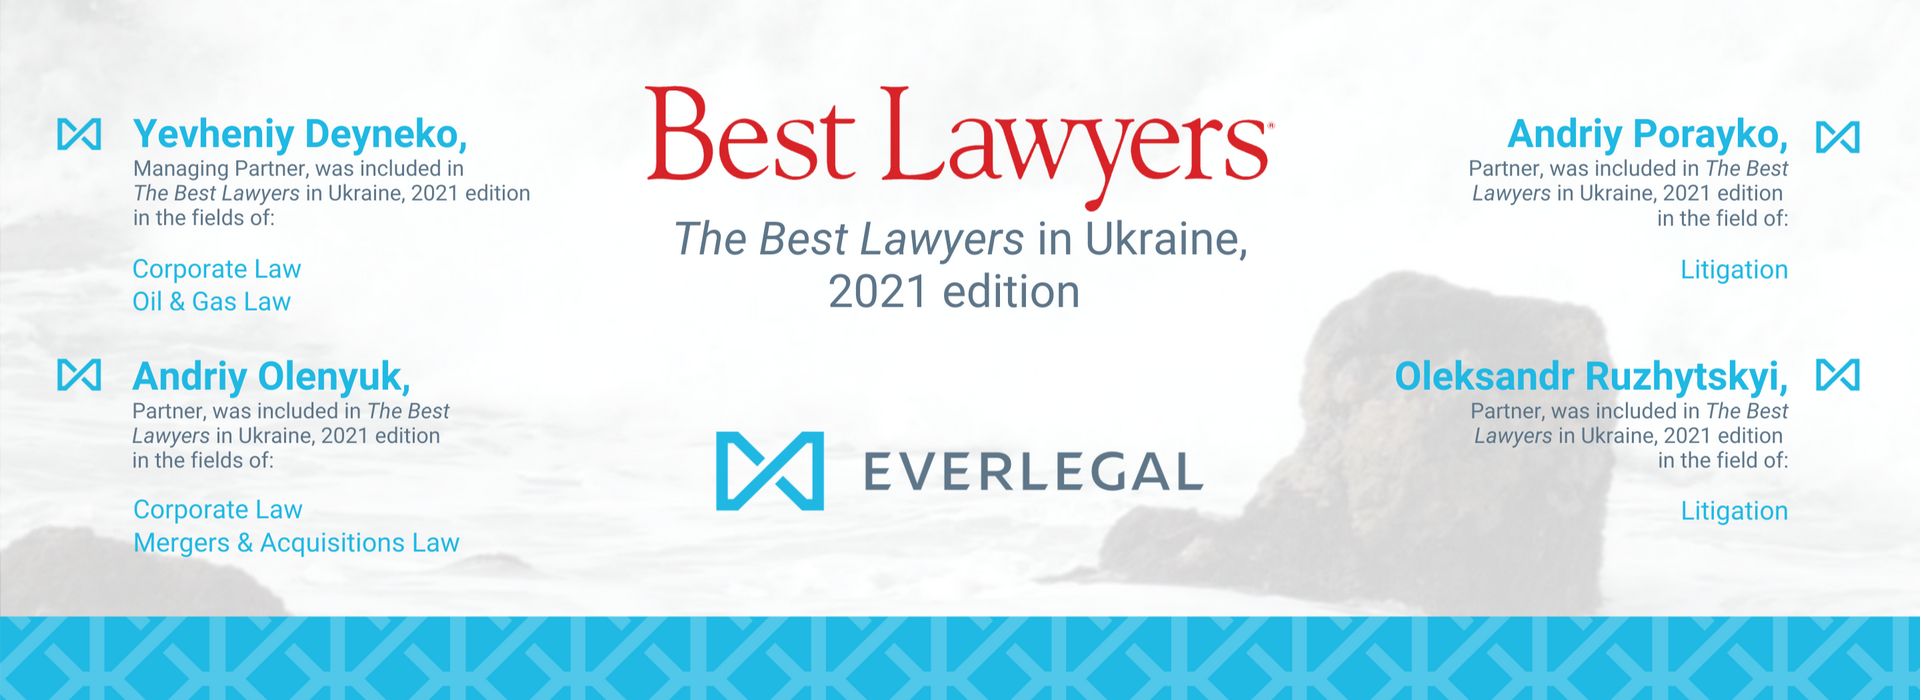 EVERLEGAL Partners Are Recommended by The Best Lawyers 2021 in Ukraine